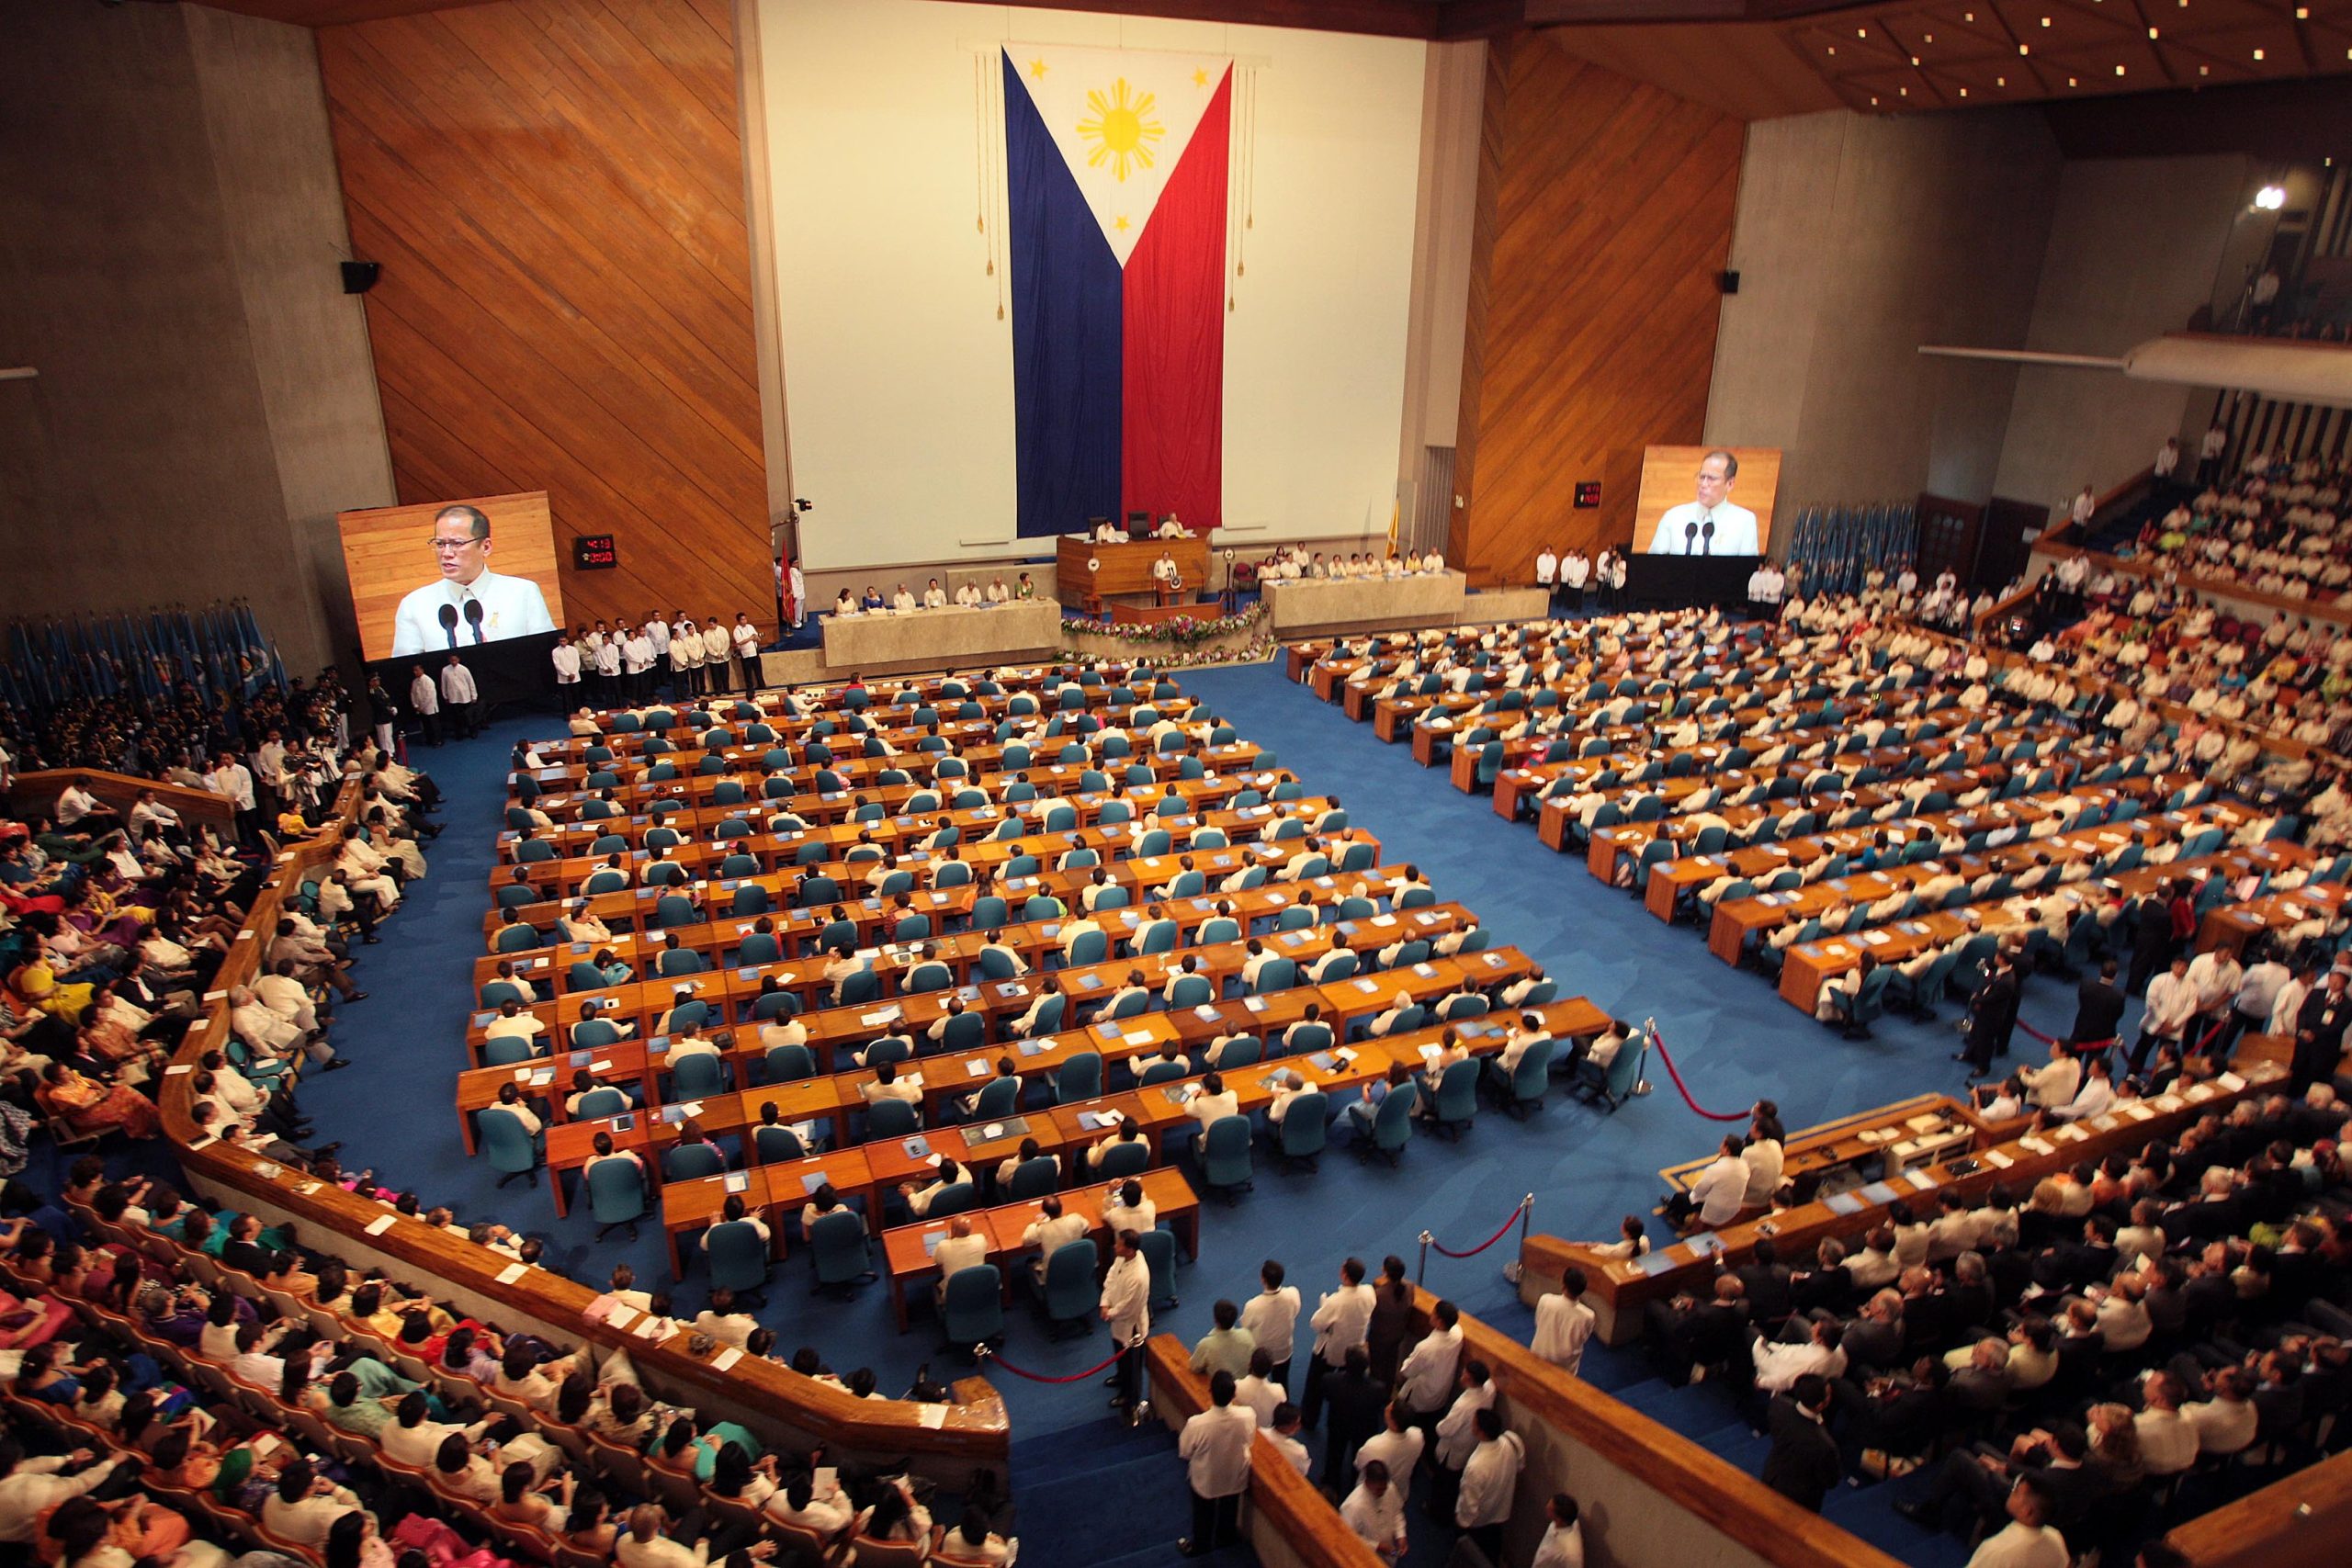 Phillipines' Congress (photo credit: Presidential Communications Operations Office, Office of the President)